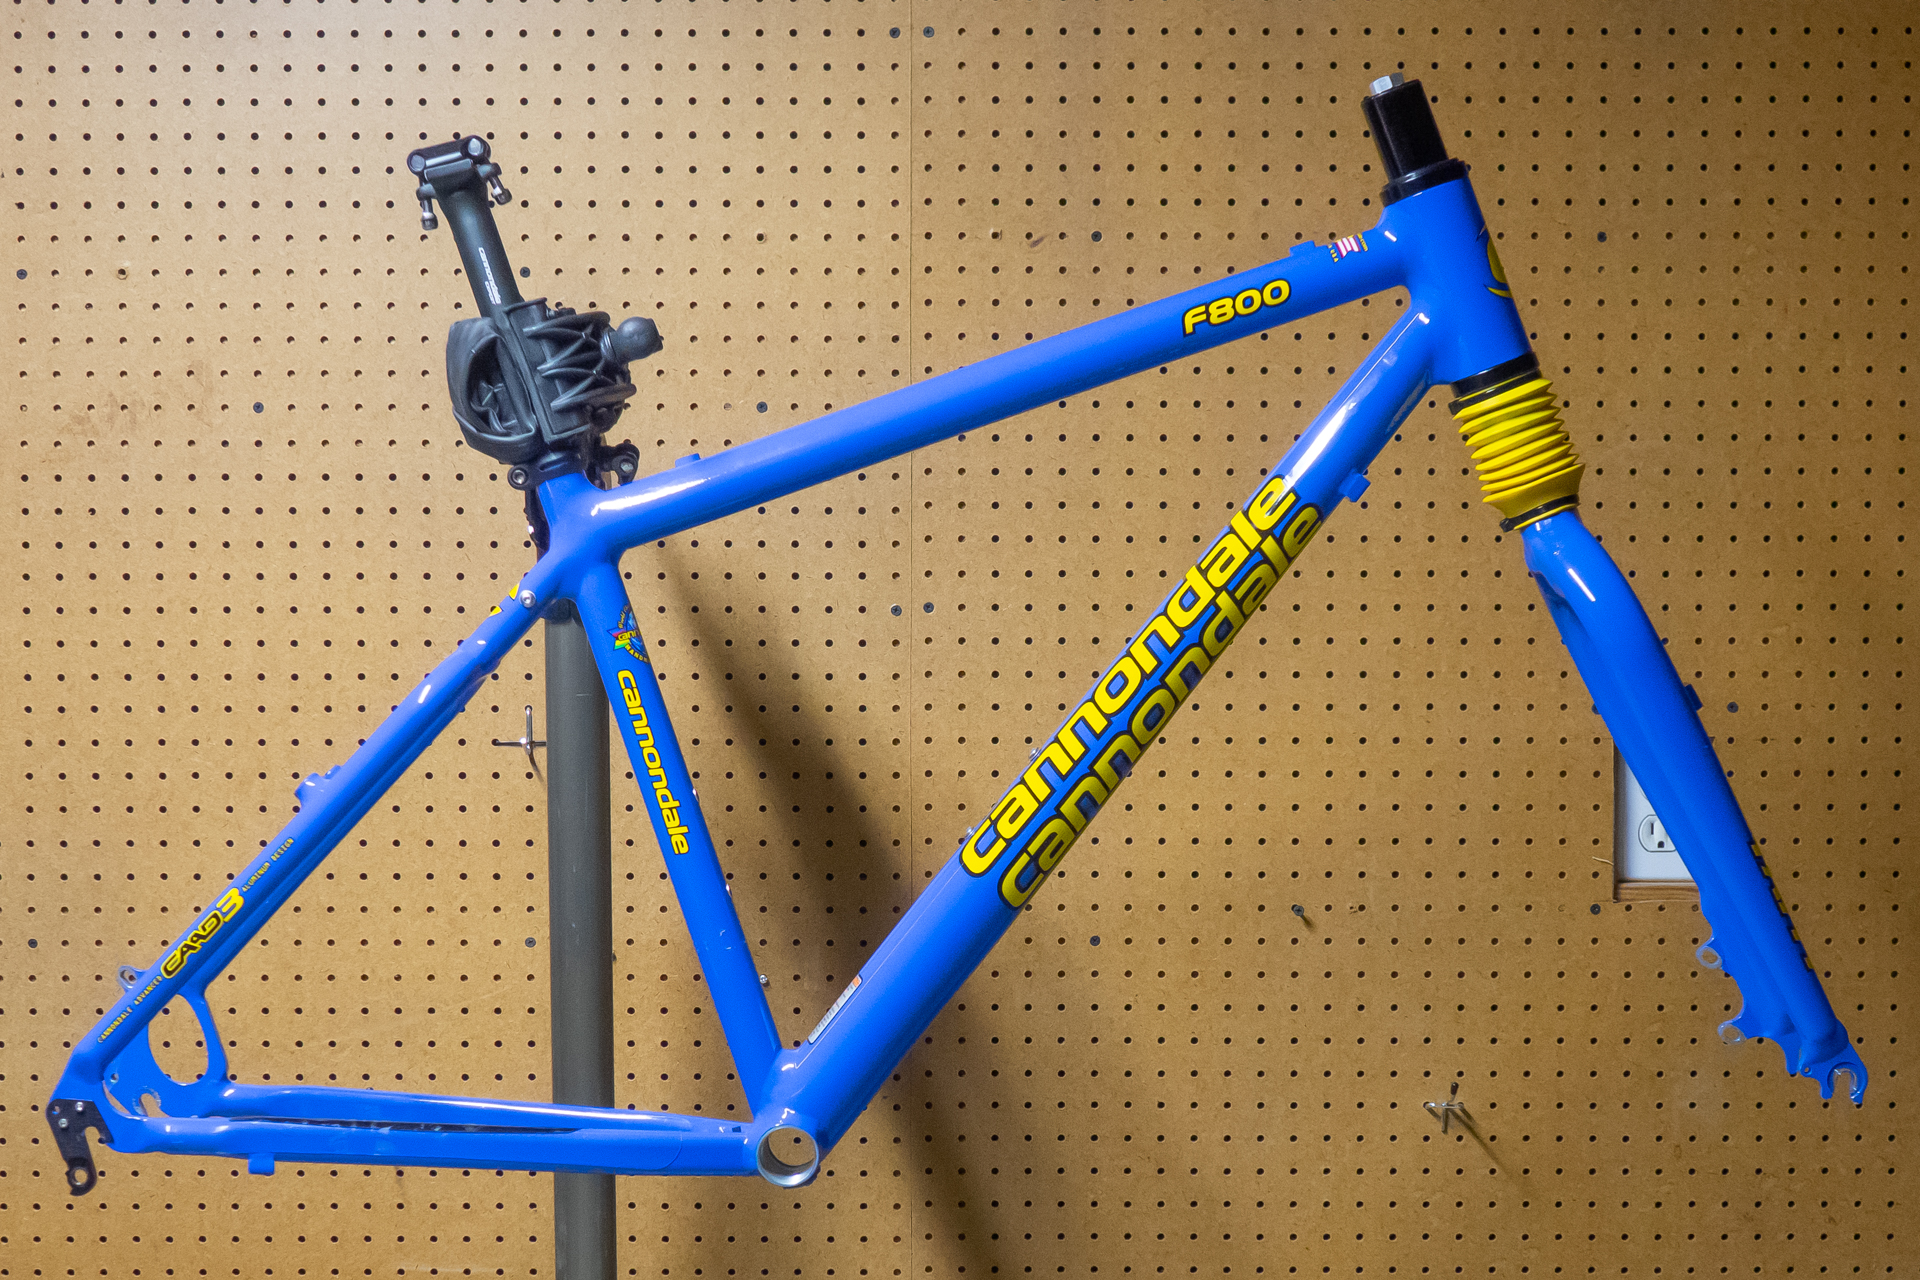 Cannondale-F800-Build-2.jpg